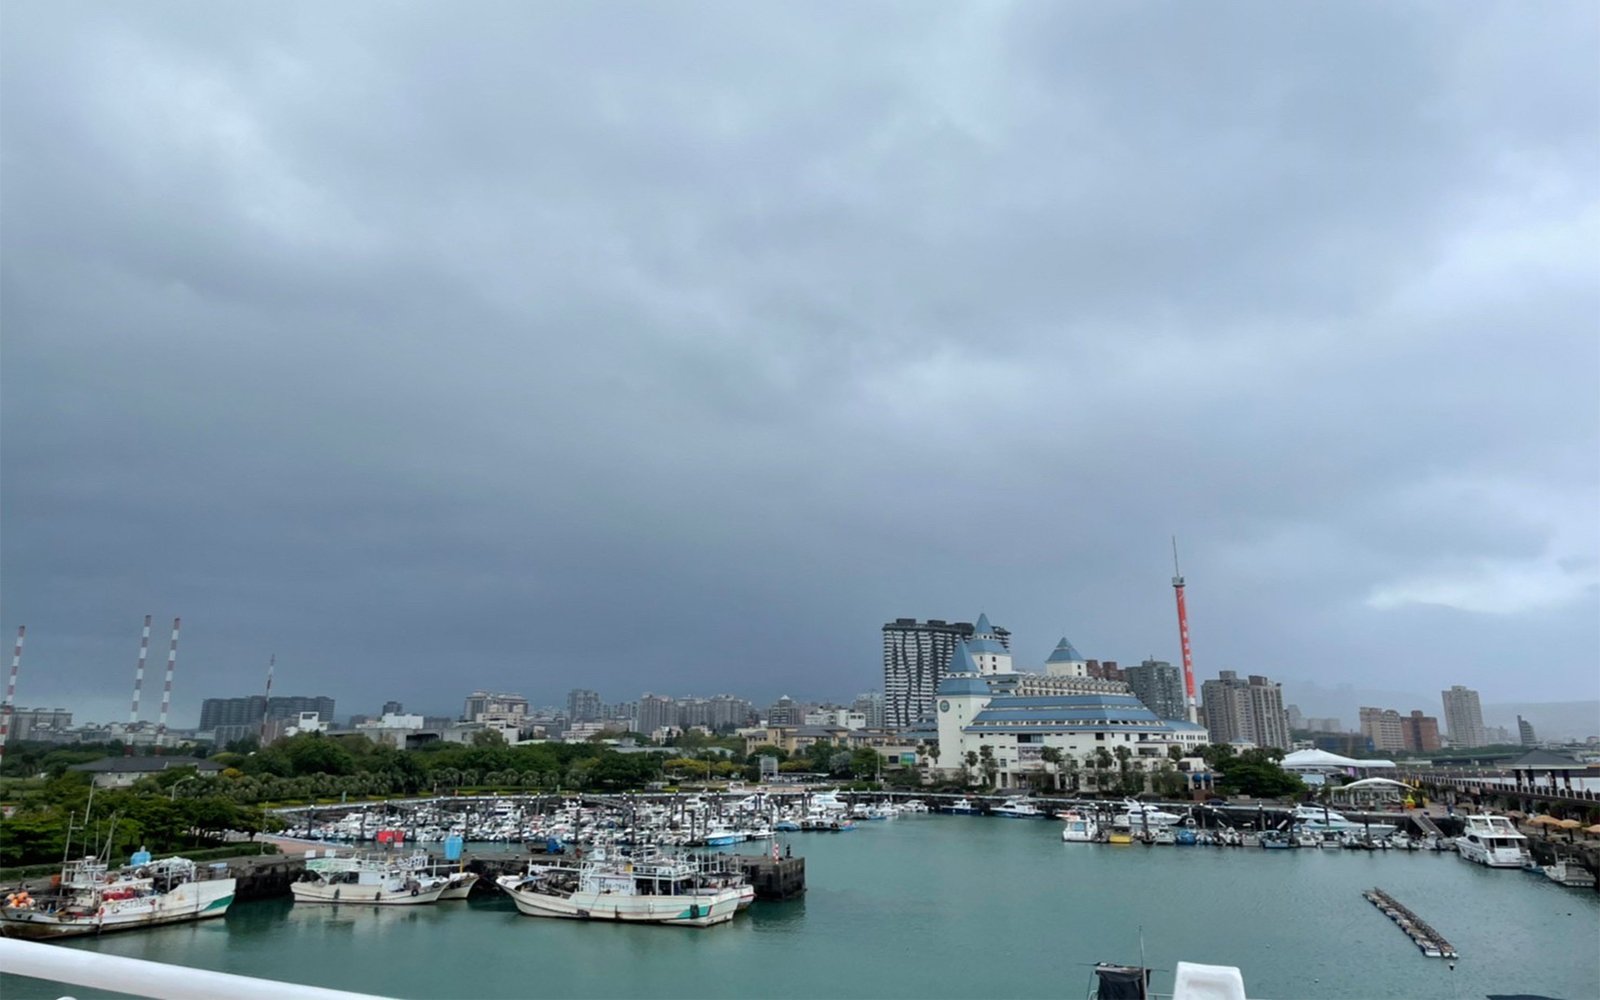 Cloudy sky over city and docked boats